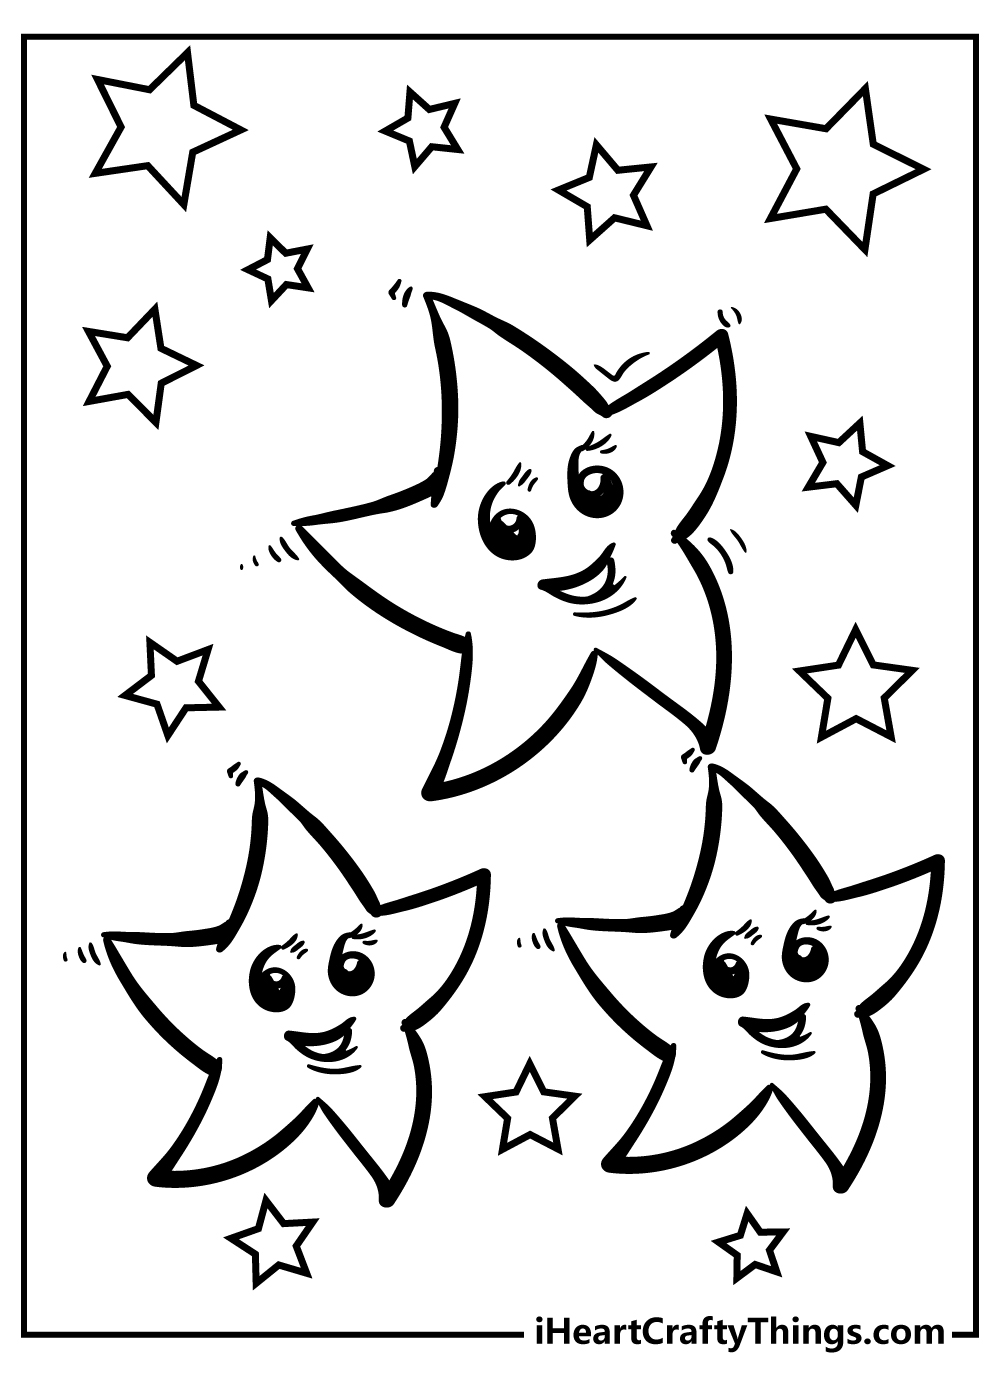 Star coloring pages free printable